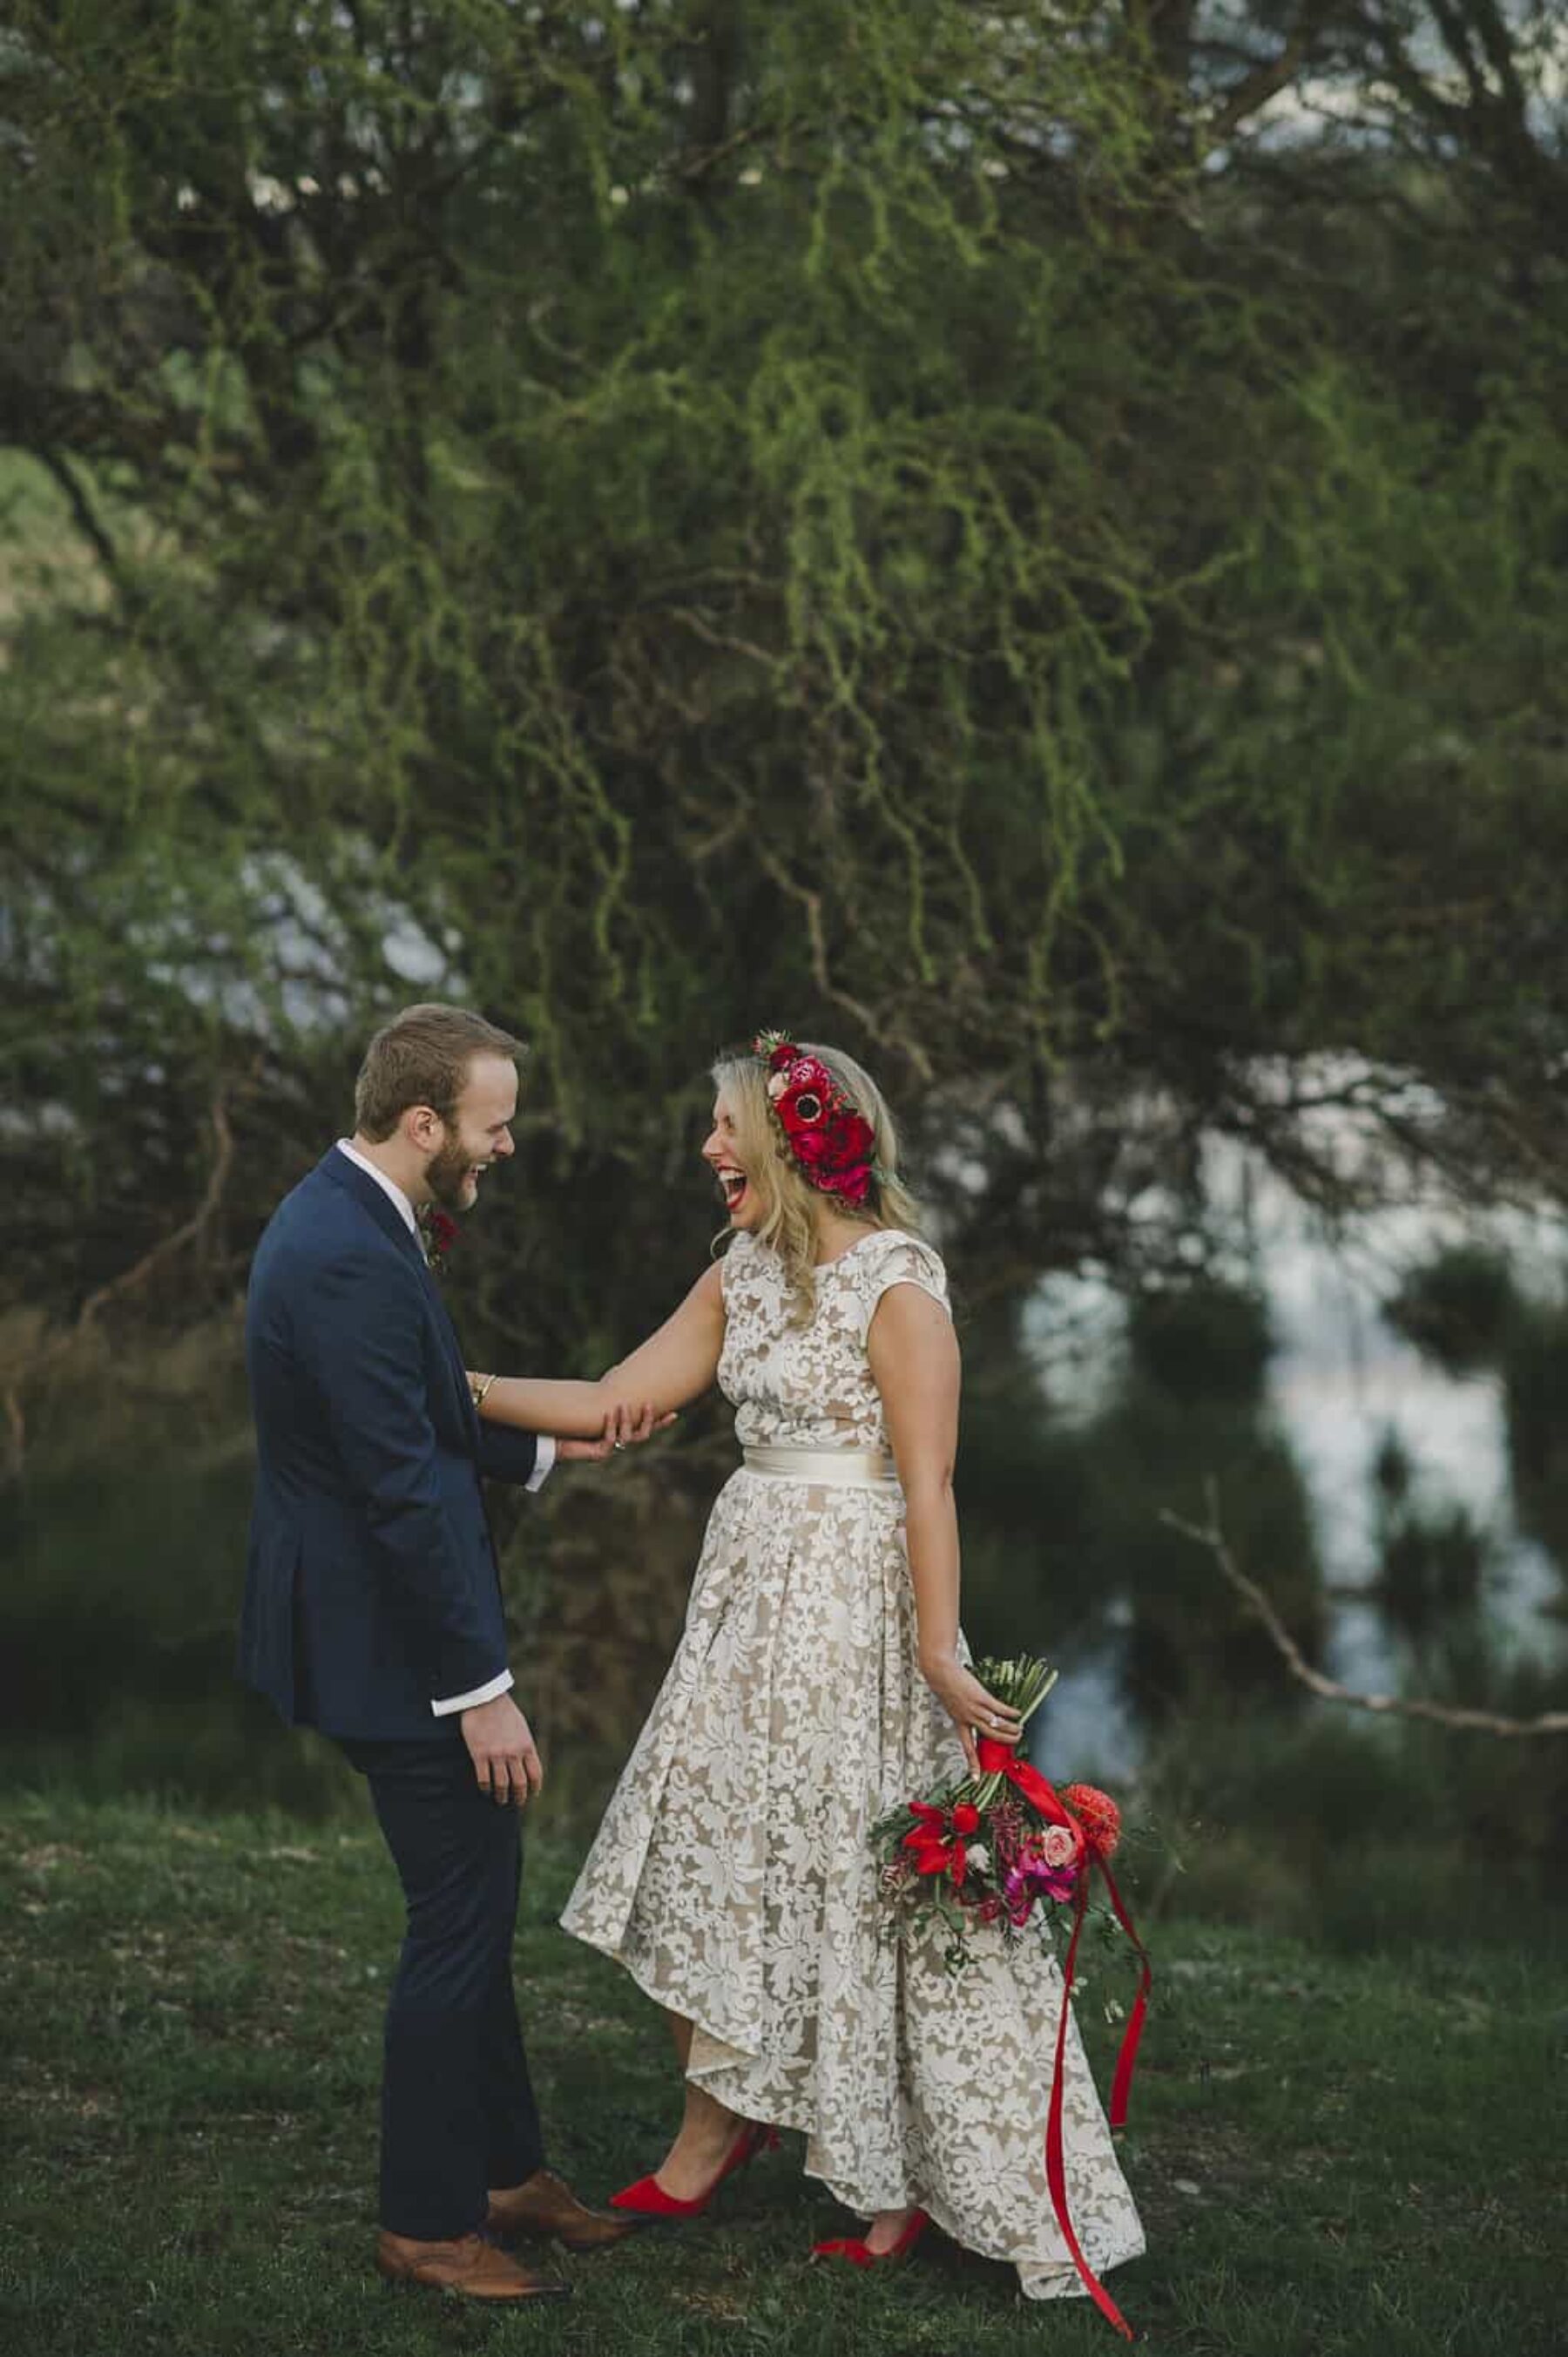 Chilled vintage wedding at Grazing at Gundaroo - Kelly Tunney Photography